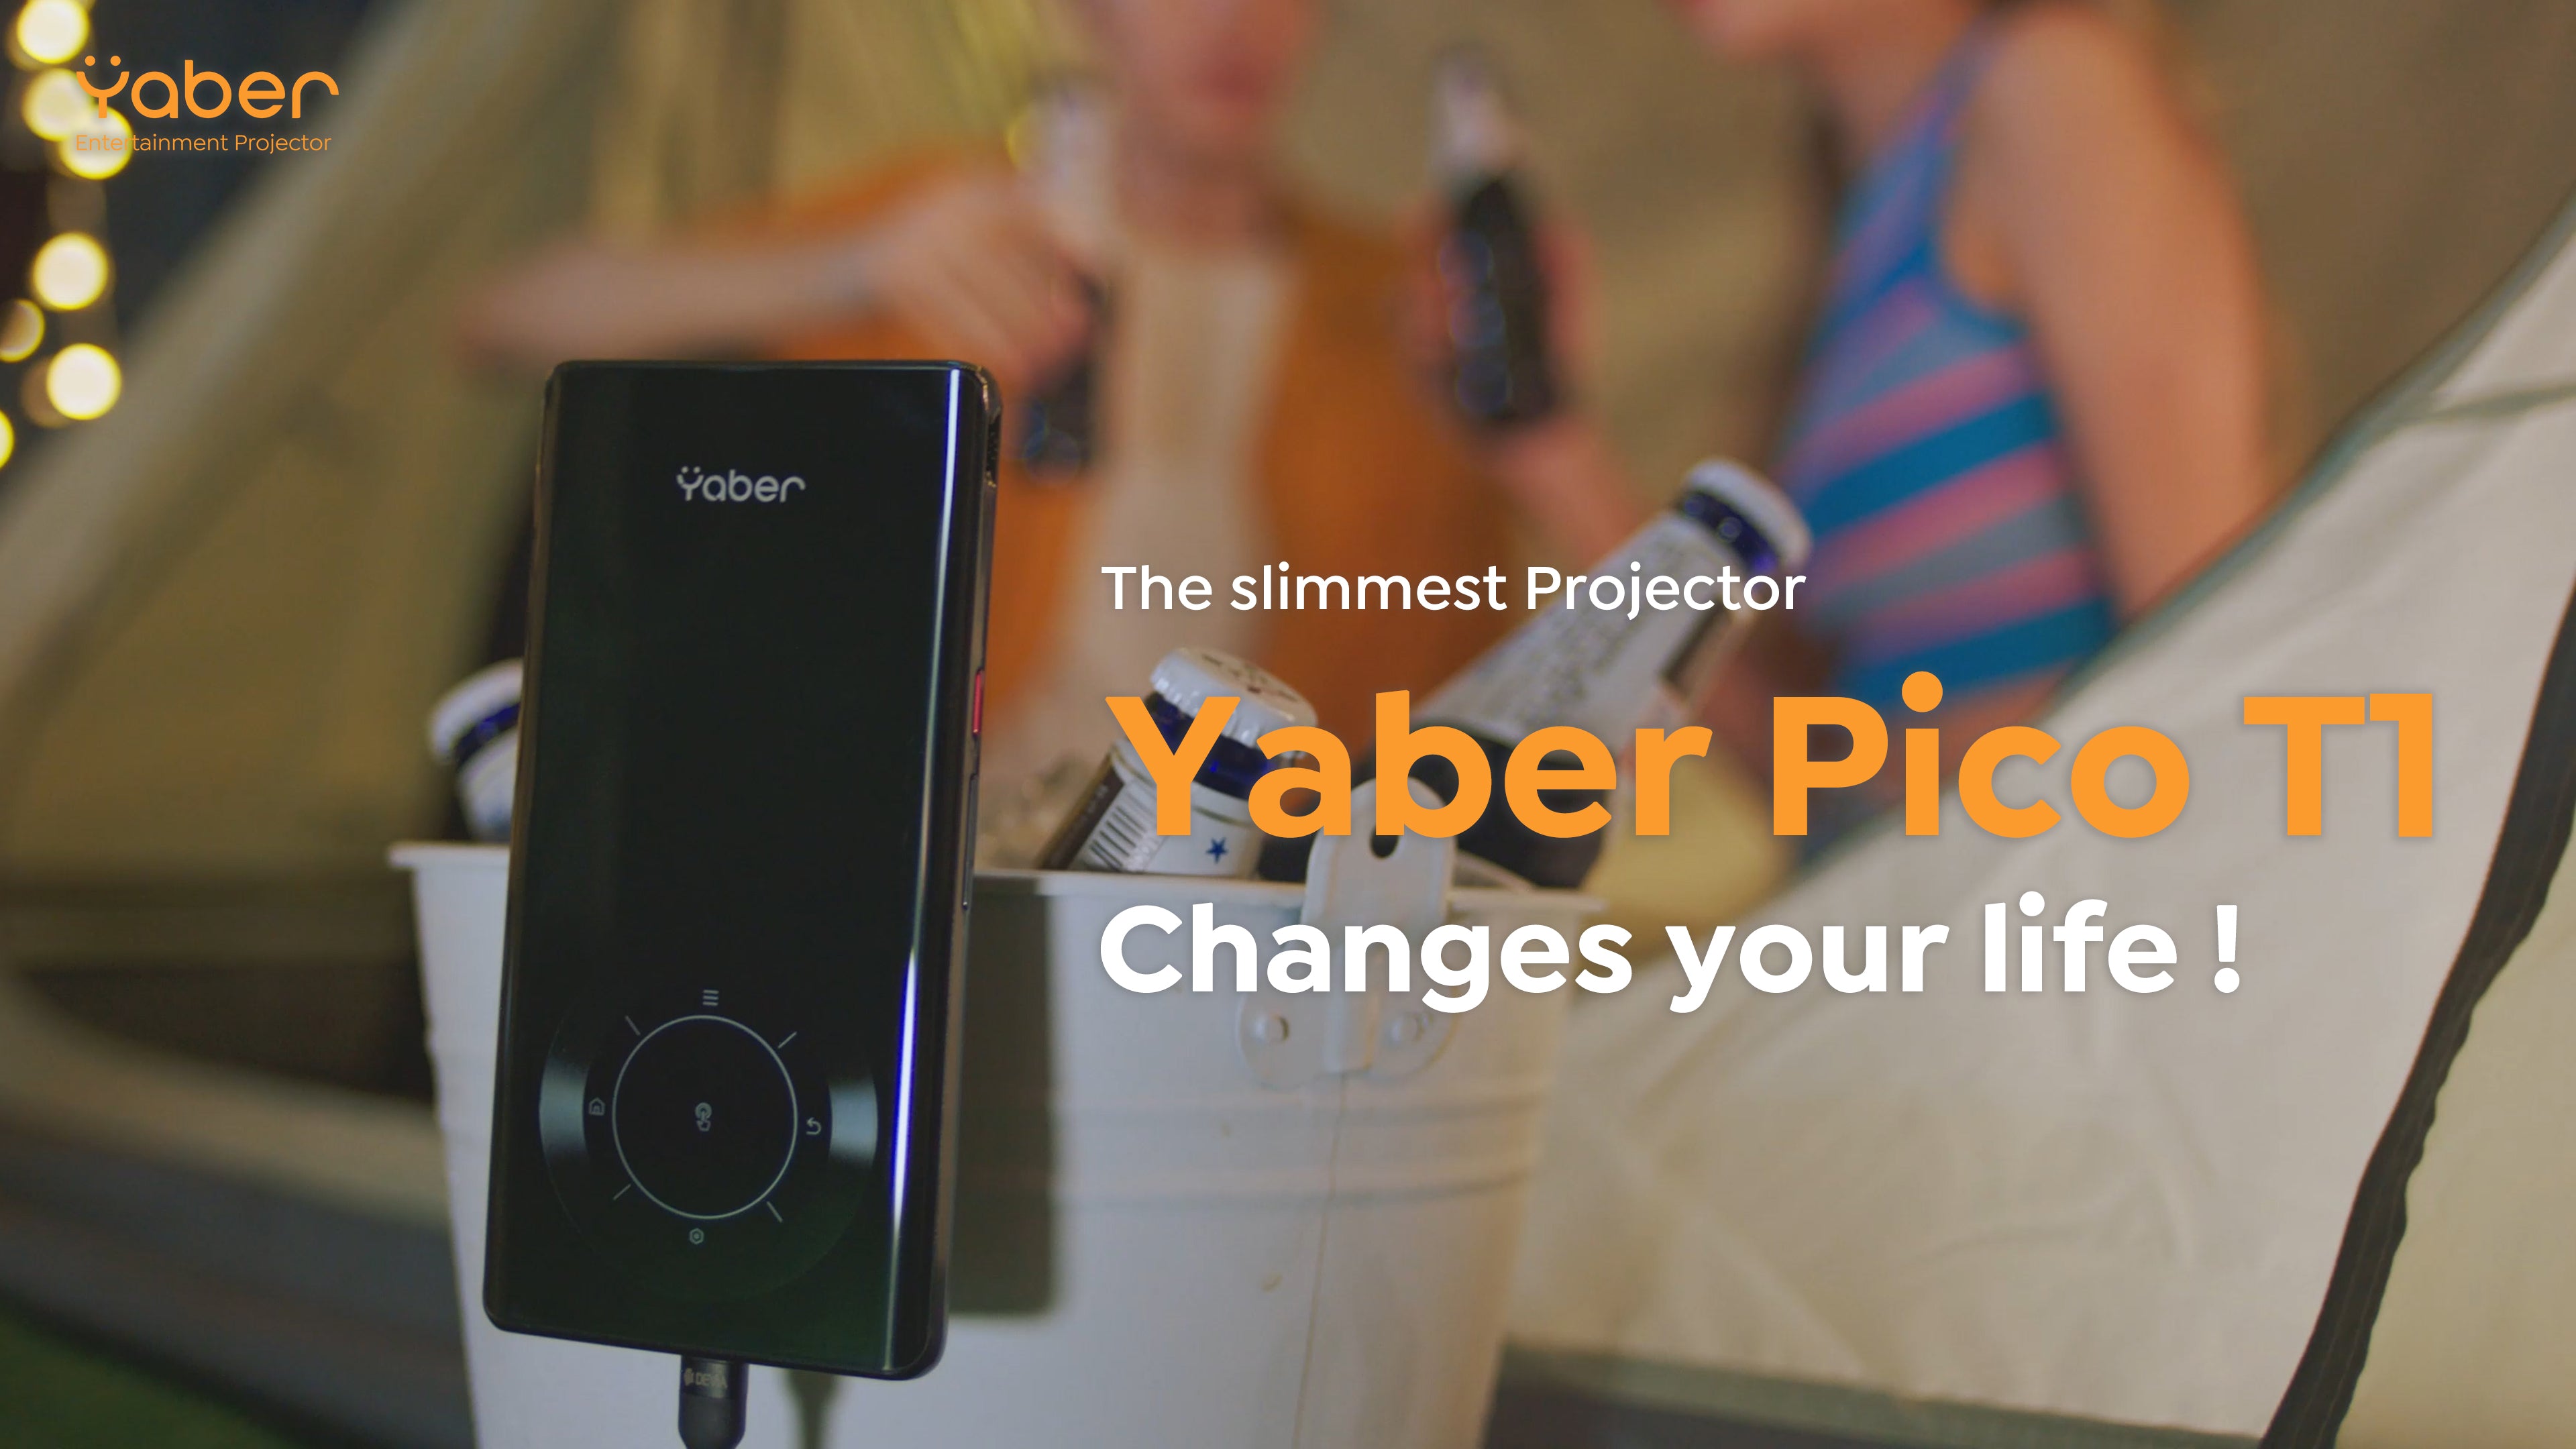 BREAKING NEWS! Yaber Pico T1 Has Launched on Indiegogo!